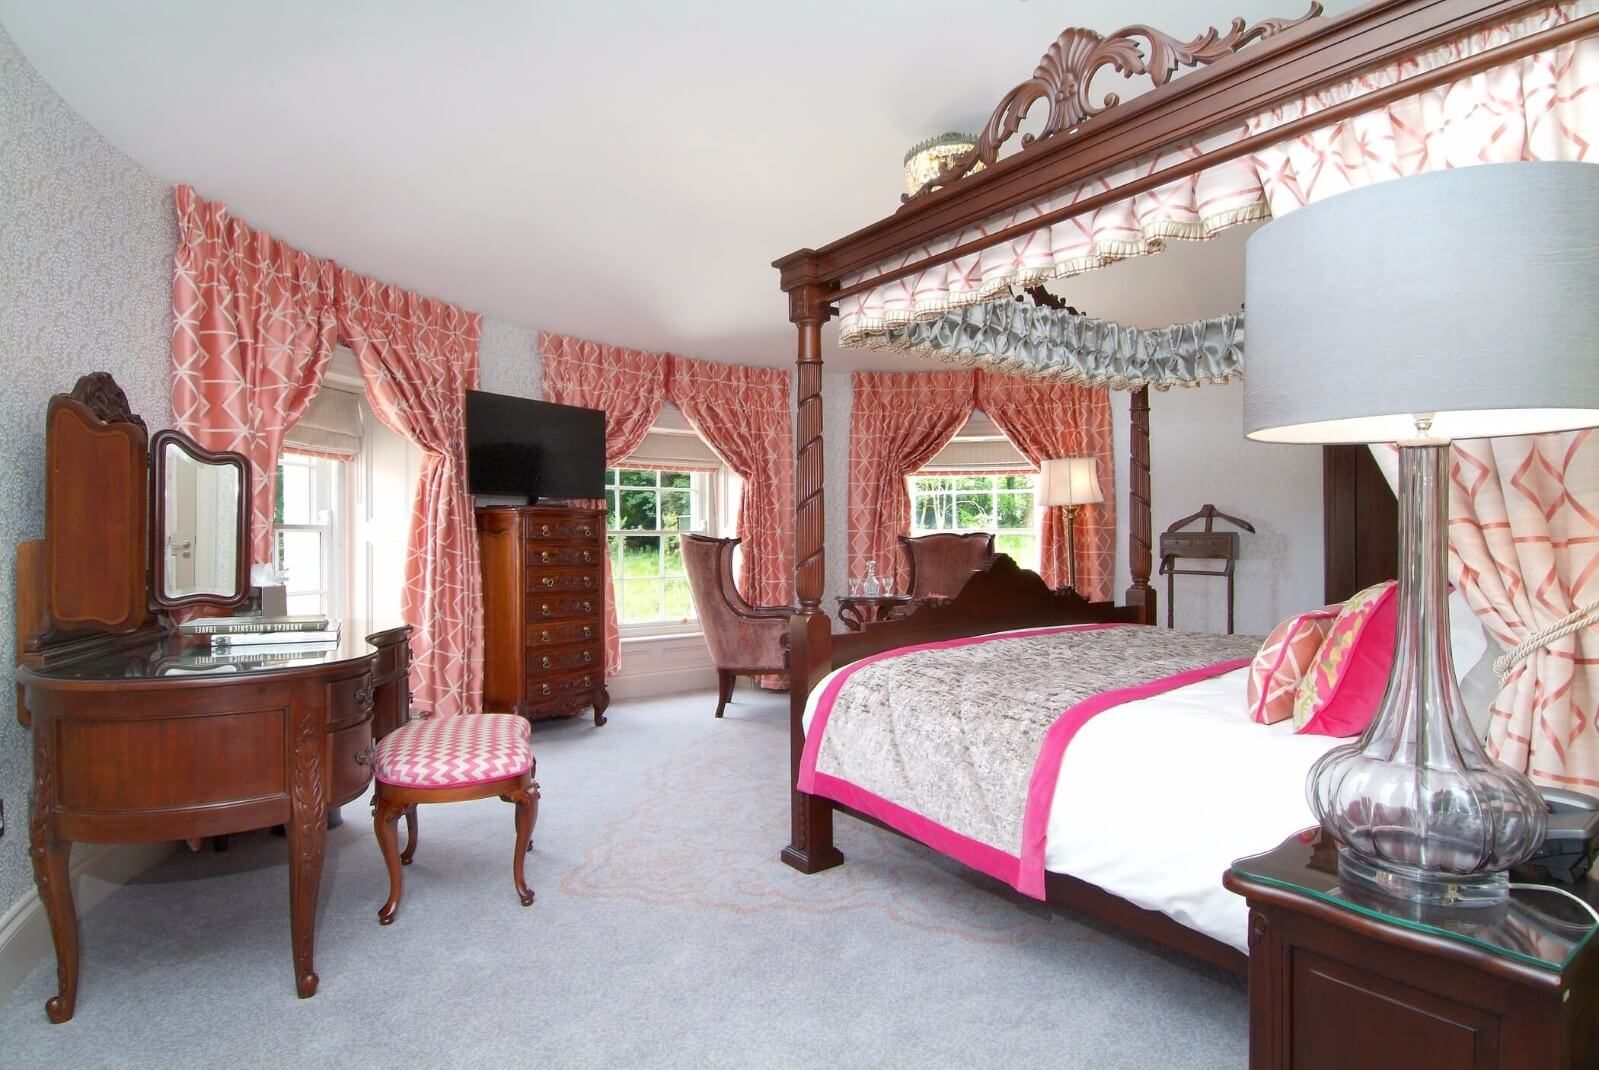 The Bomany Suite at Rockhill House